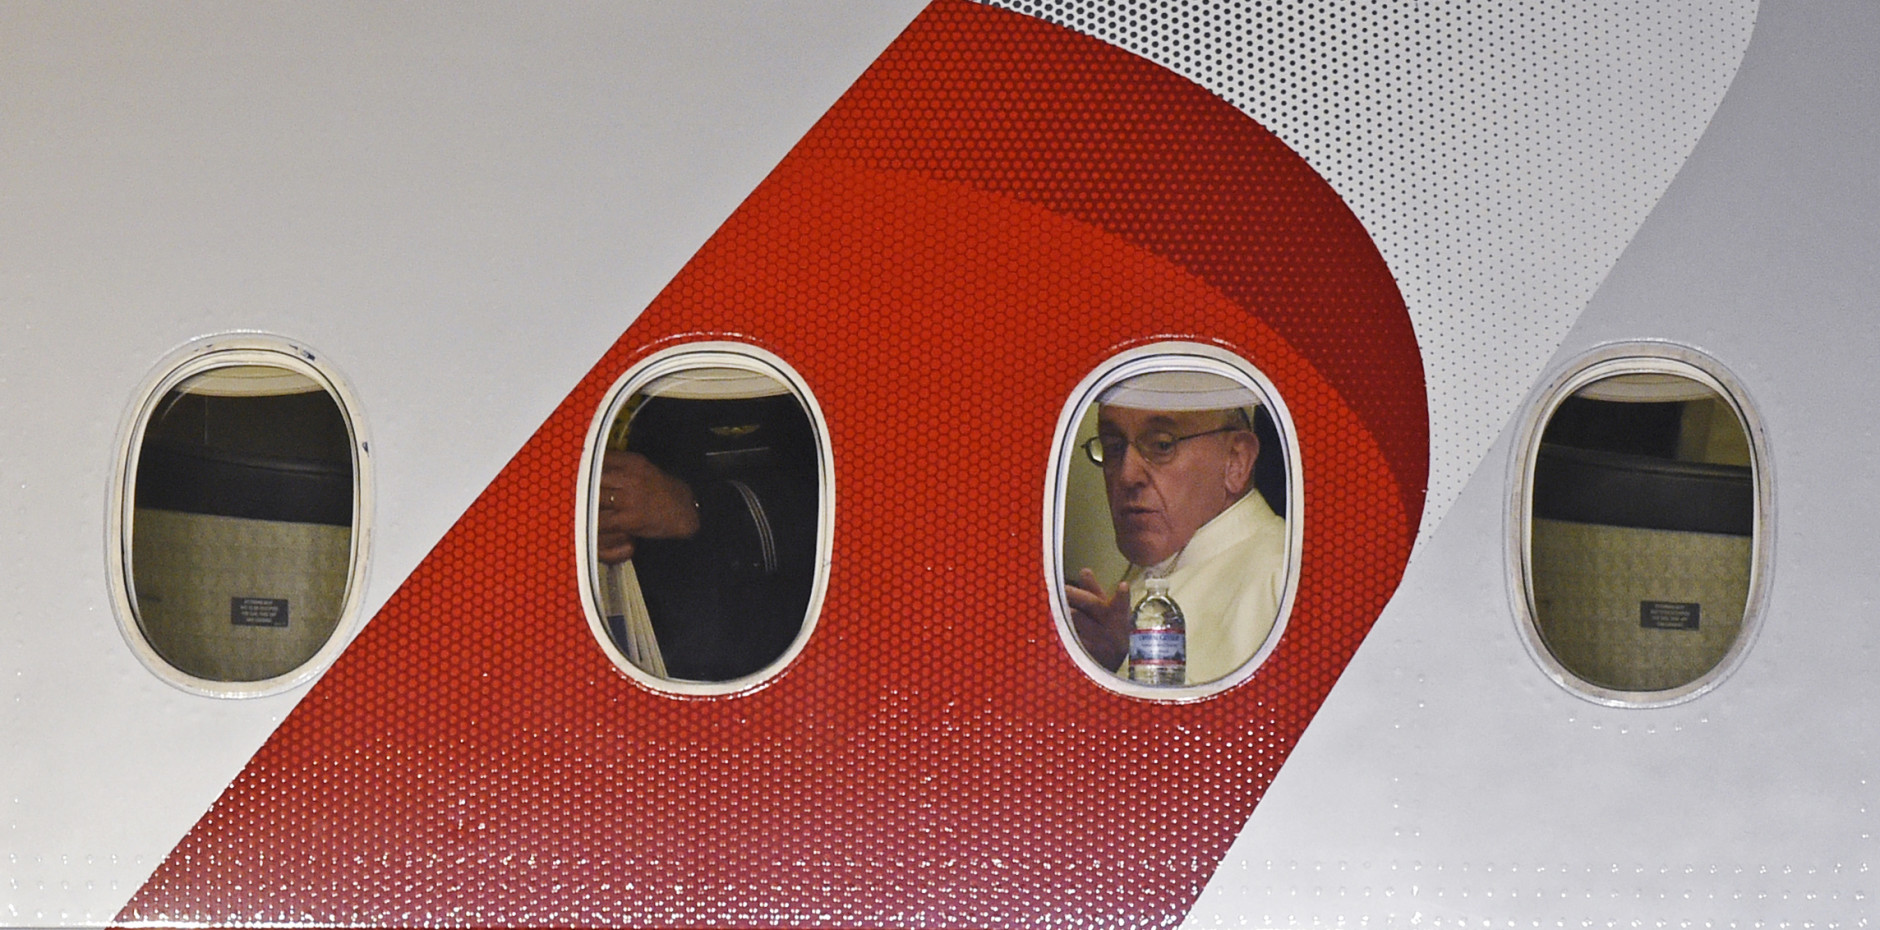 Pope Francis looks out the window a plane as he prepares to depart Philadelphia International Airport in Philadelphia, Sunday, Sept. 27, 2015, on his way back to Rome. Pope Francis wrapped up his 10-day trip to Cuba and the United States on Sunday. (AP Photo/Susan Walsh)